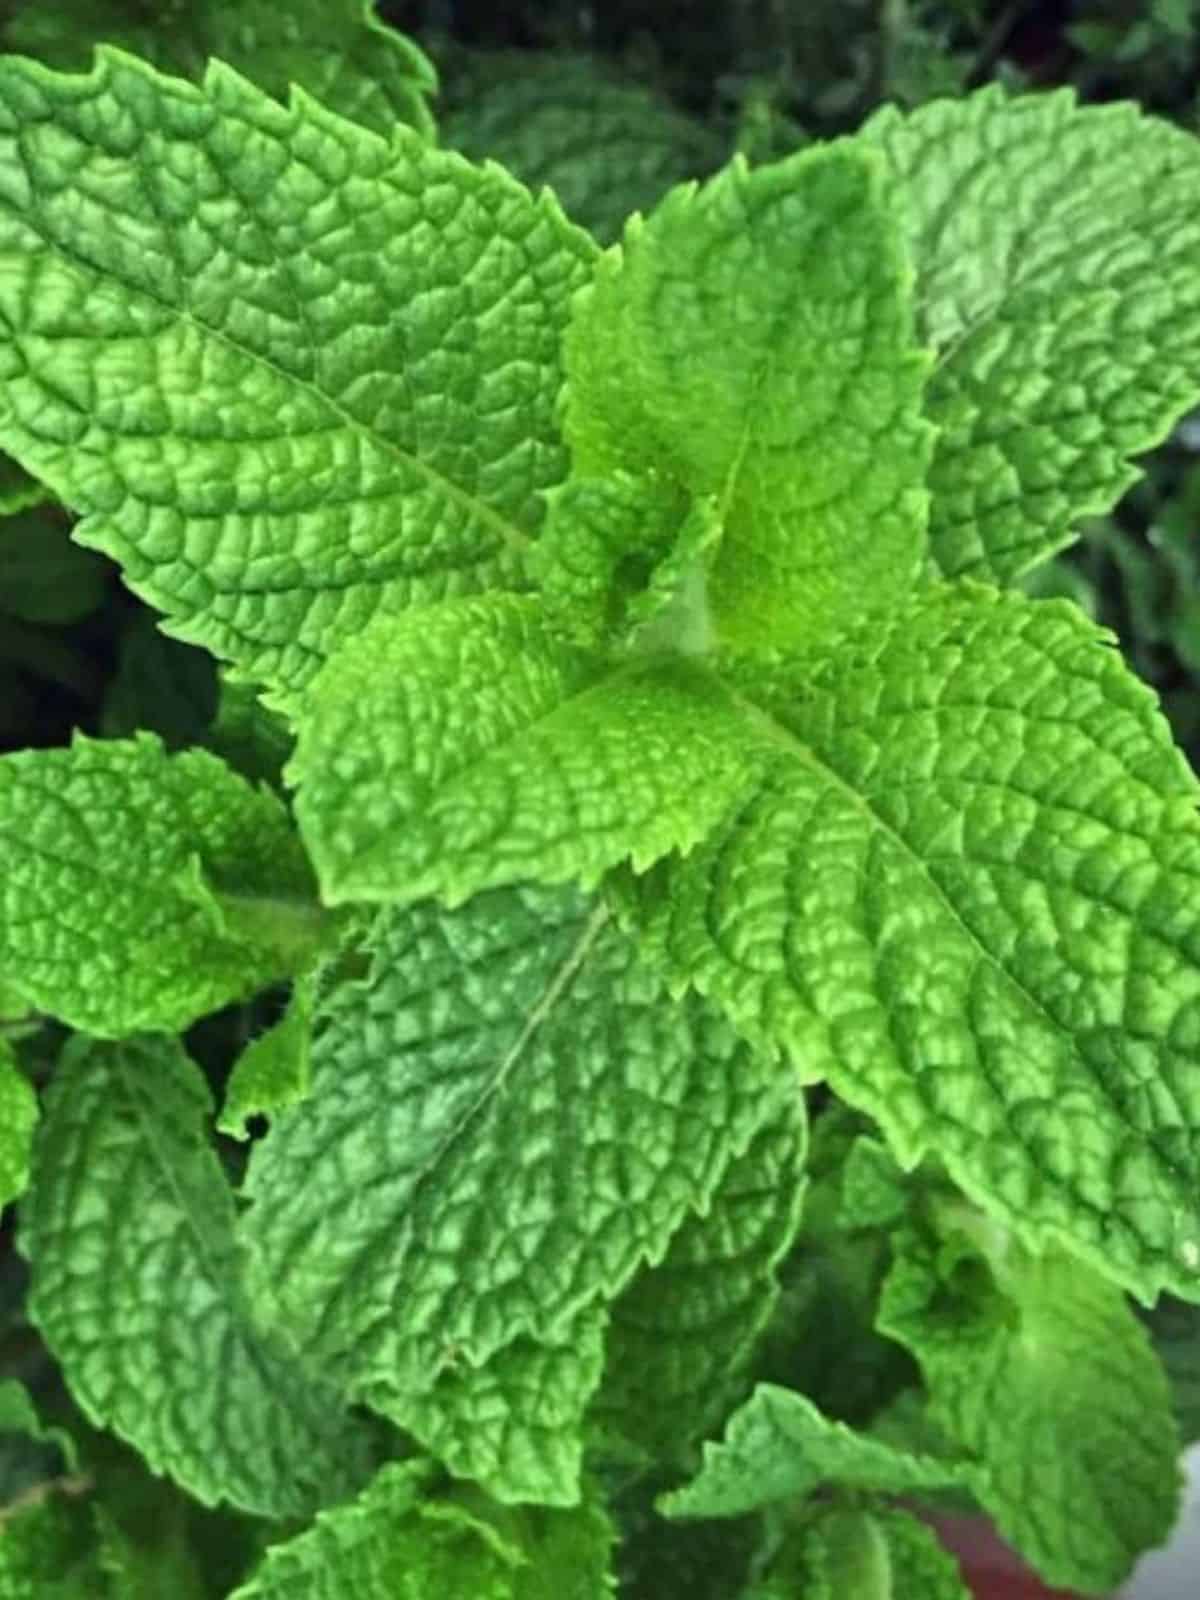 10 reasons to grow mint (without fear) - grow forage cook ferment